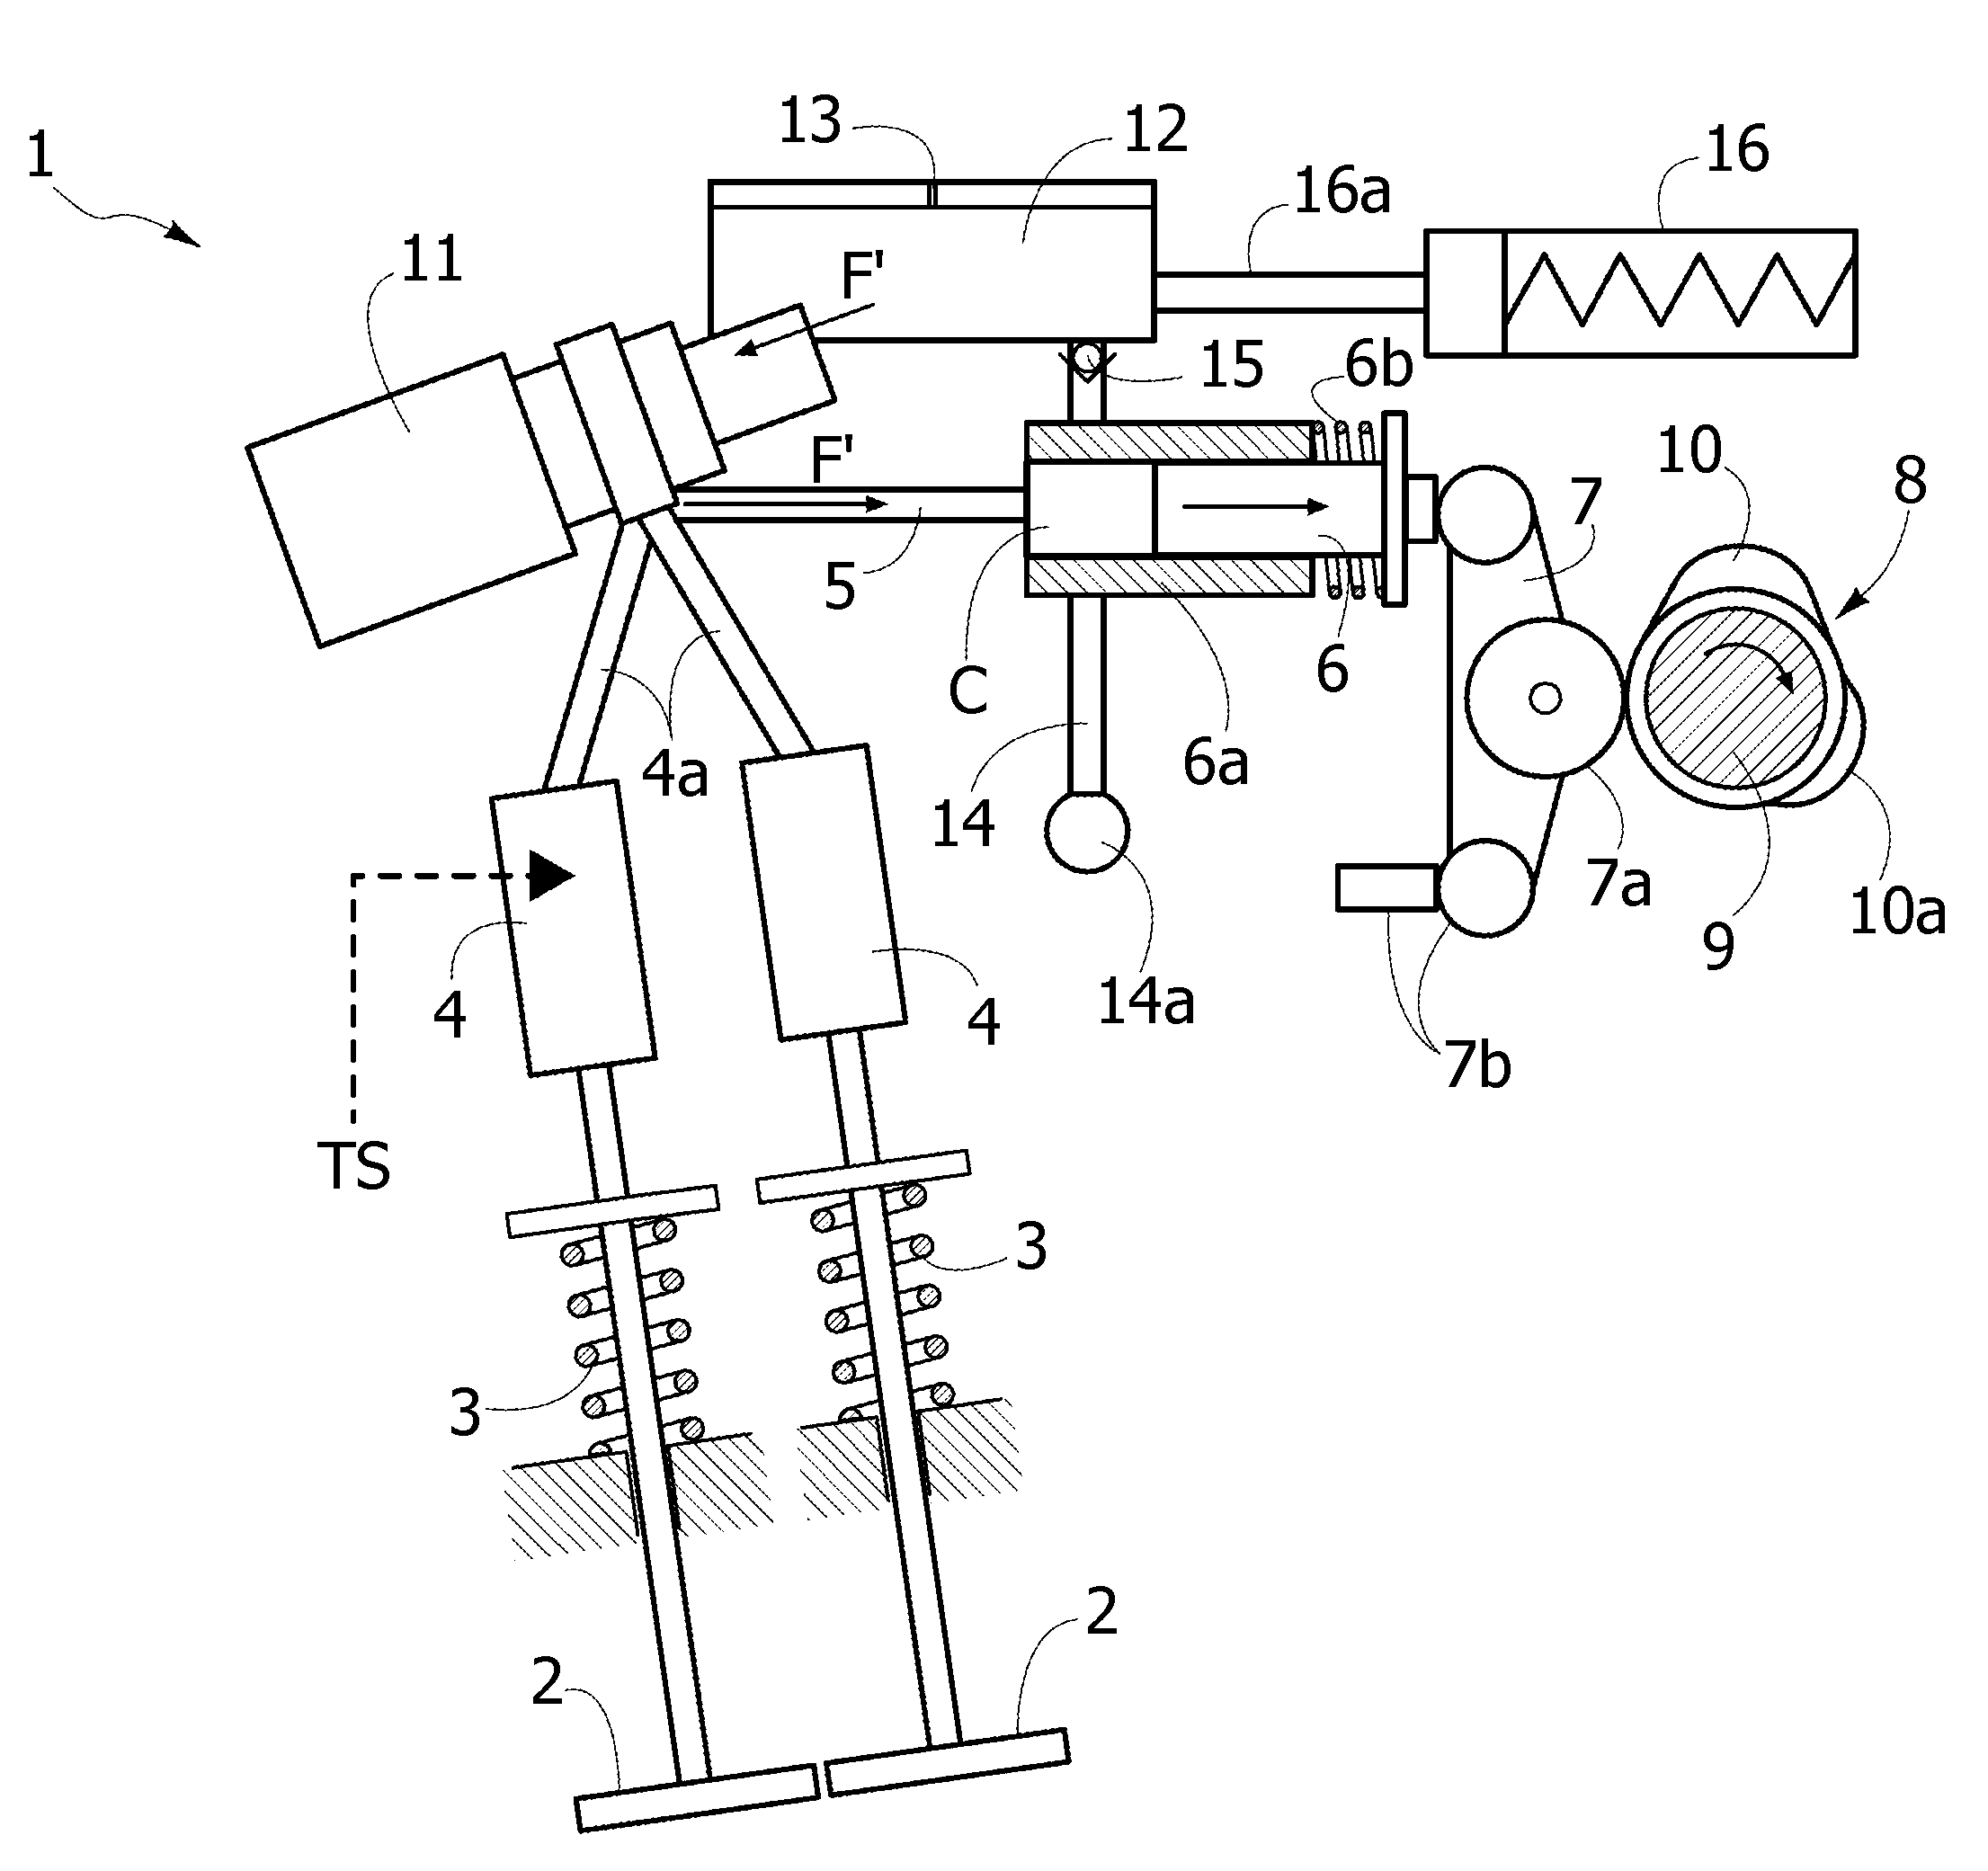 Method for controlling a valve control system with variable valve lift of an internal combustion engine by operating a compensation in response to the deviation of the characteristics of a working fluid with respect to nominal conditions